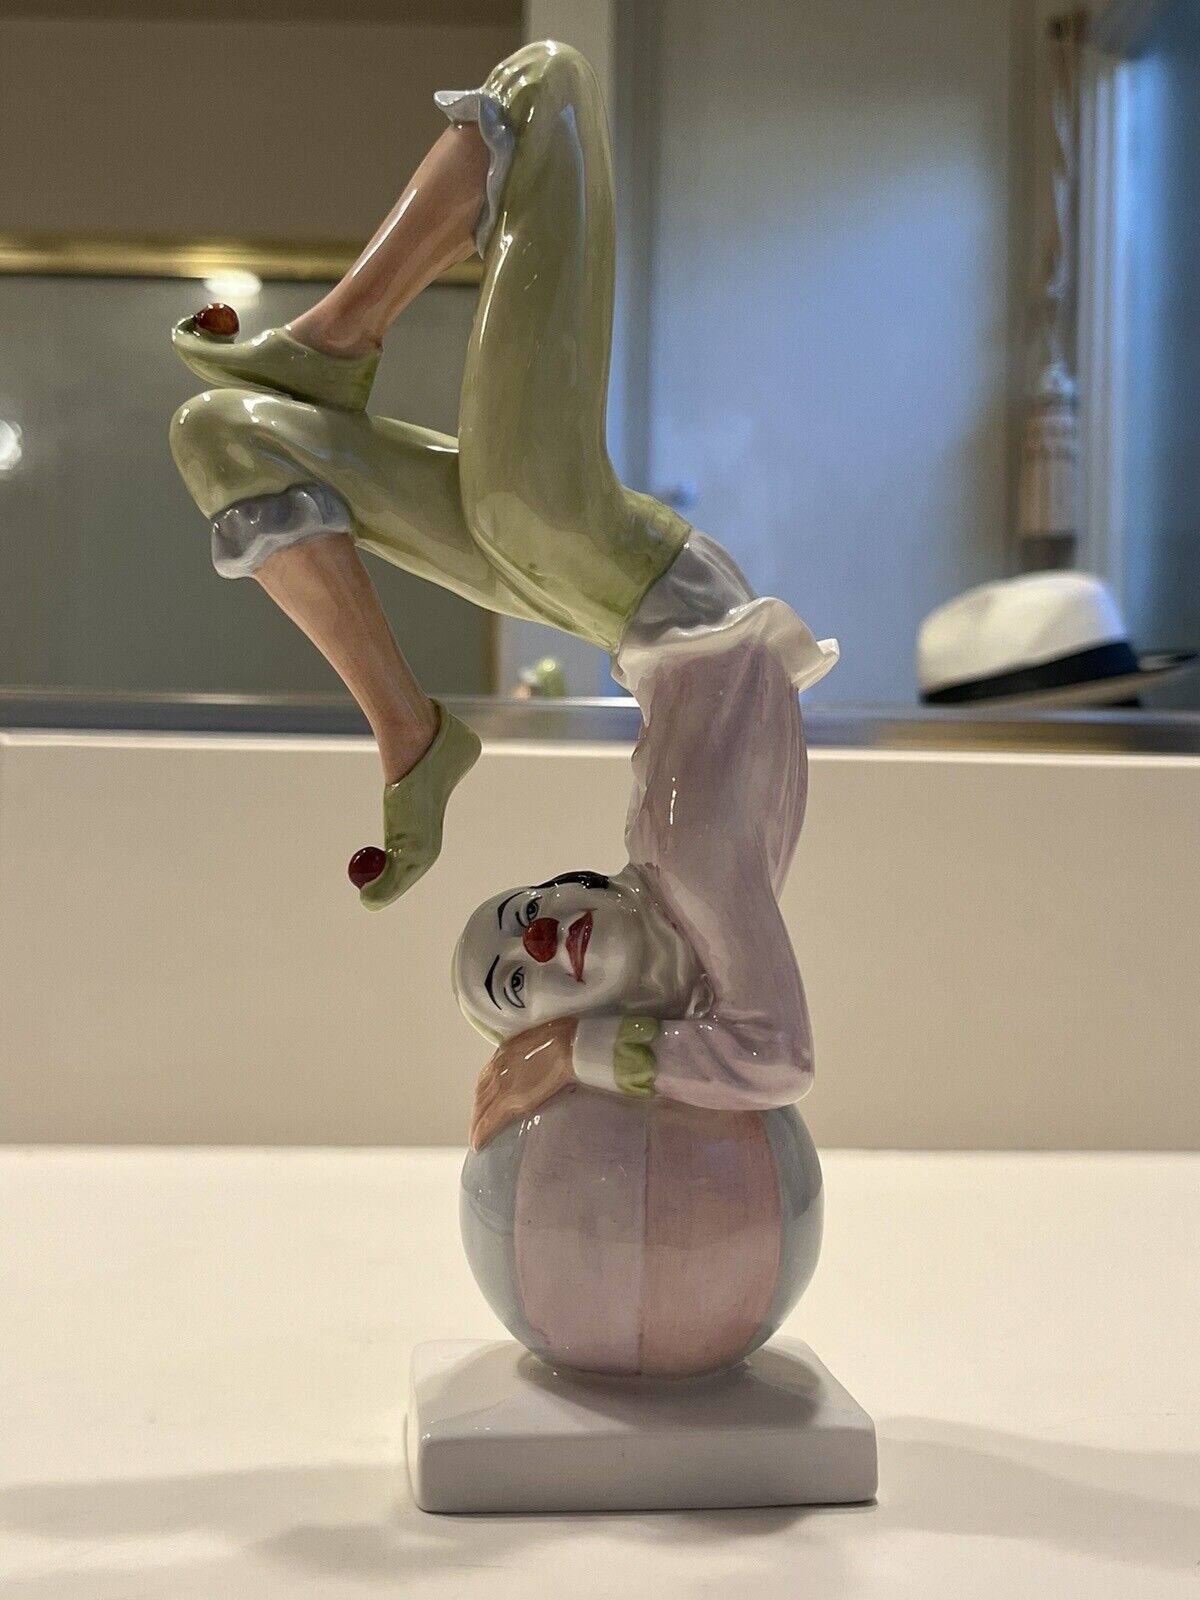 FREE 2 DAY SHIP - ROYAL DOULTON - Reflections Series Clown Figurine (1989-1991)